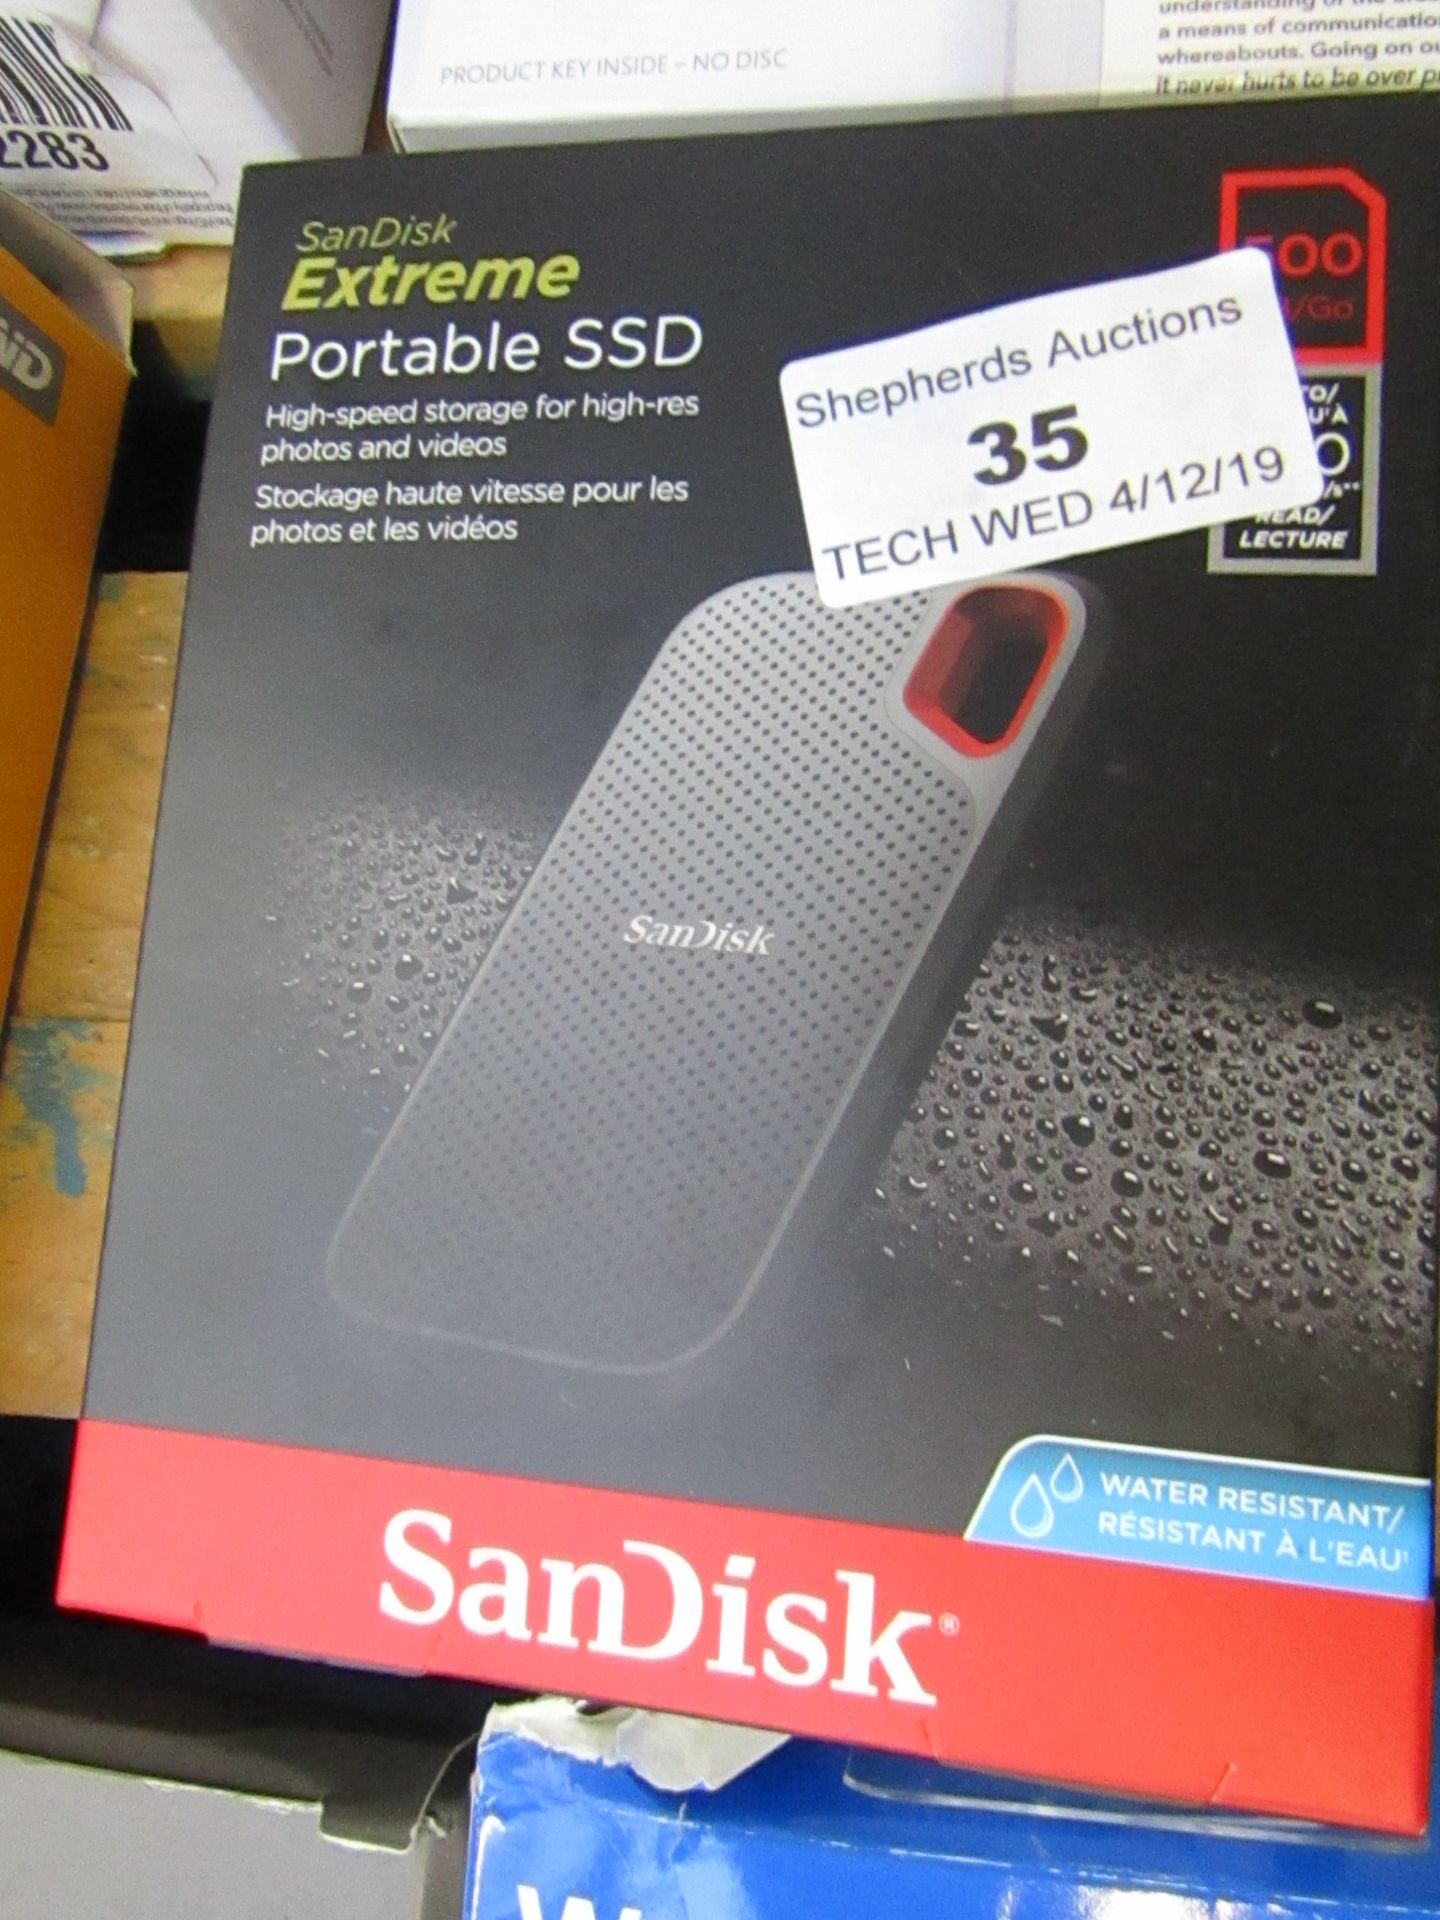 Sandisk Extreme Portable SSD 500GB, boxed and unchecked.